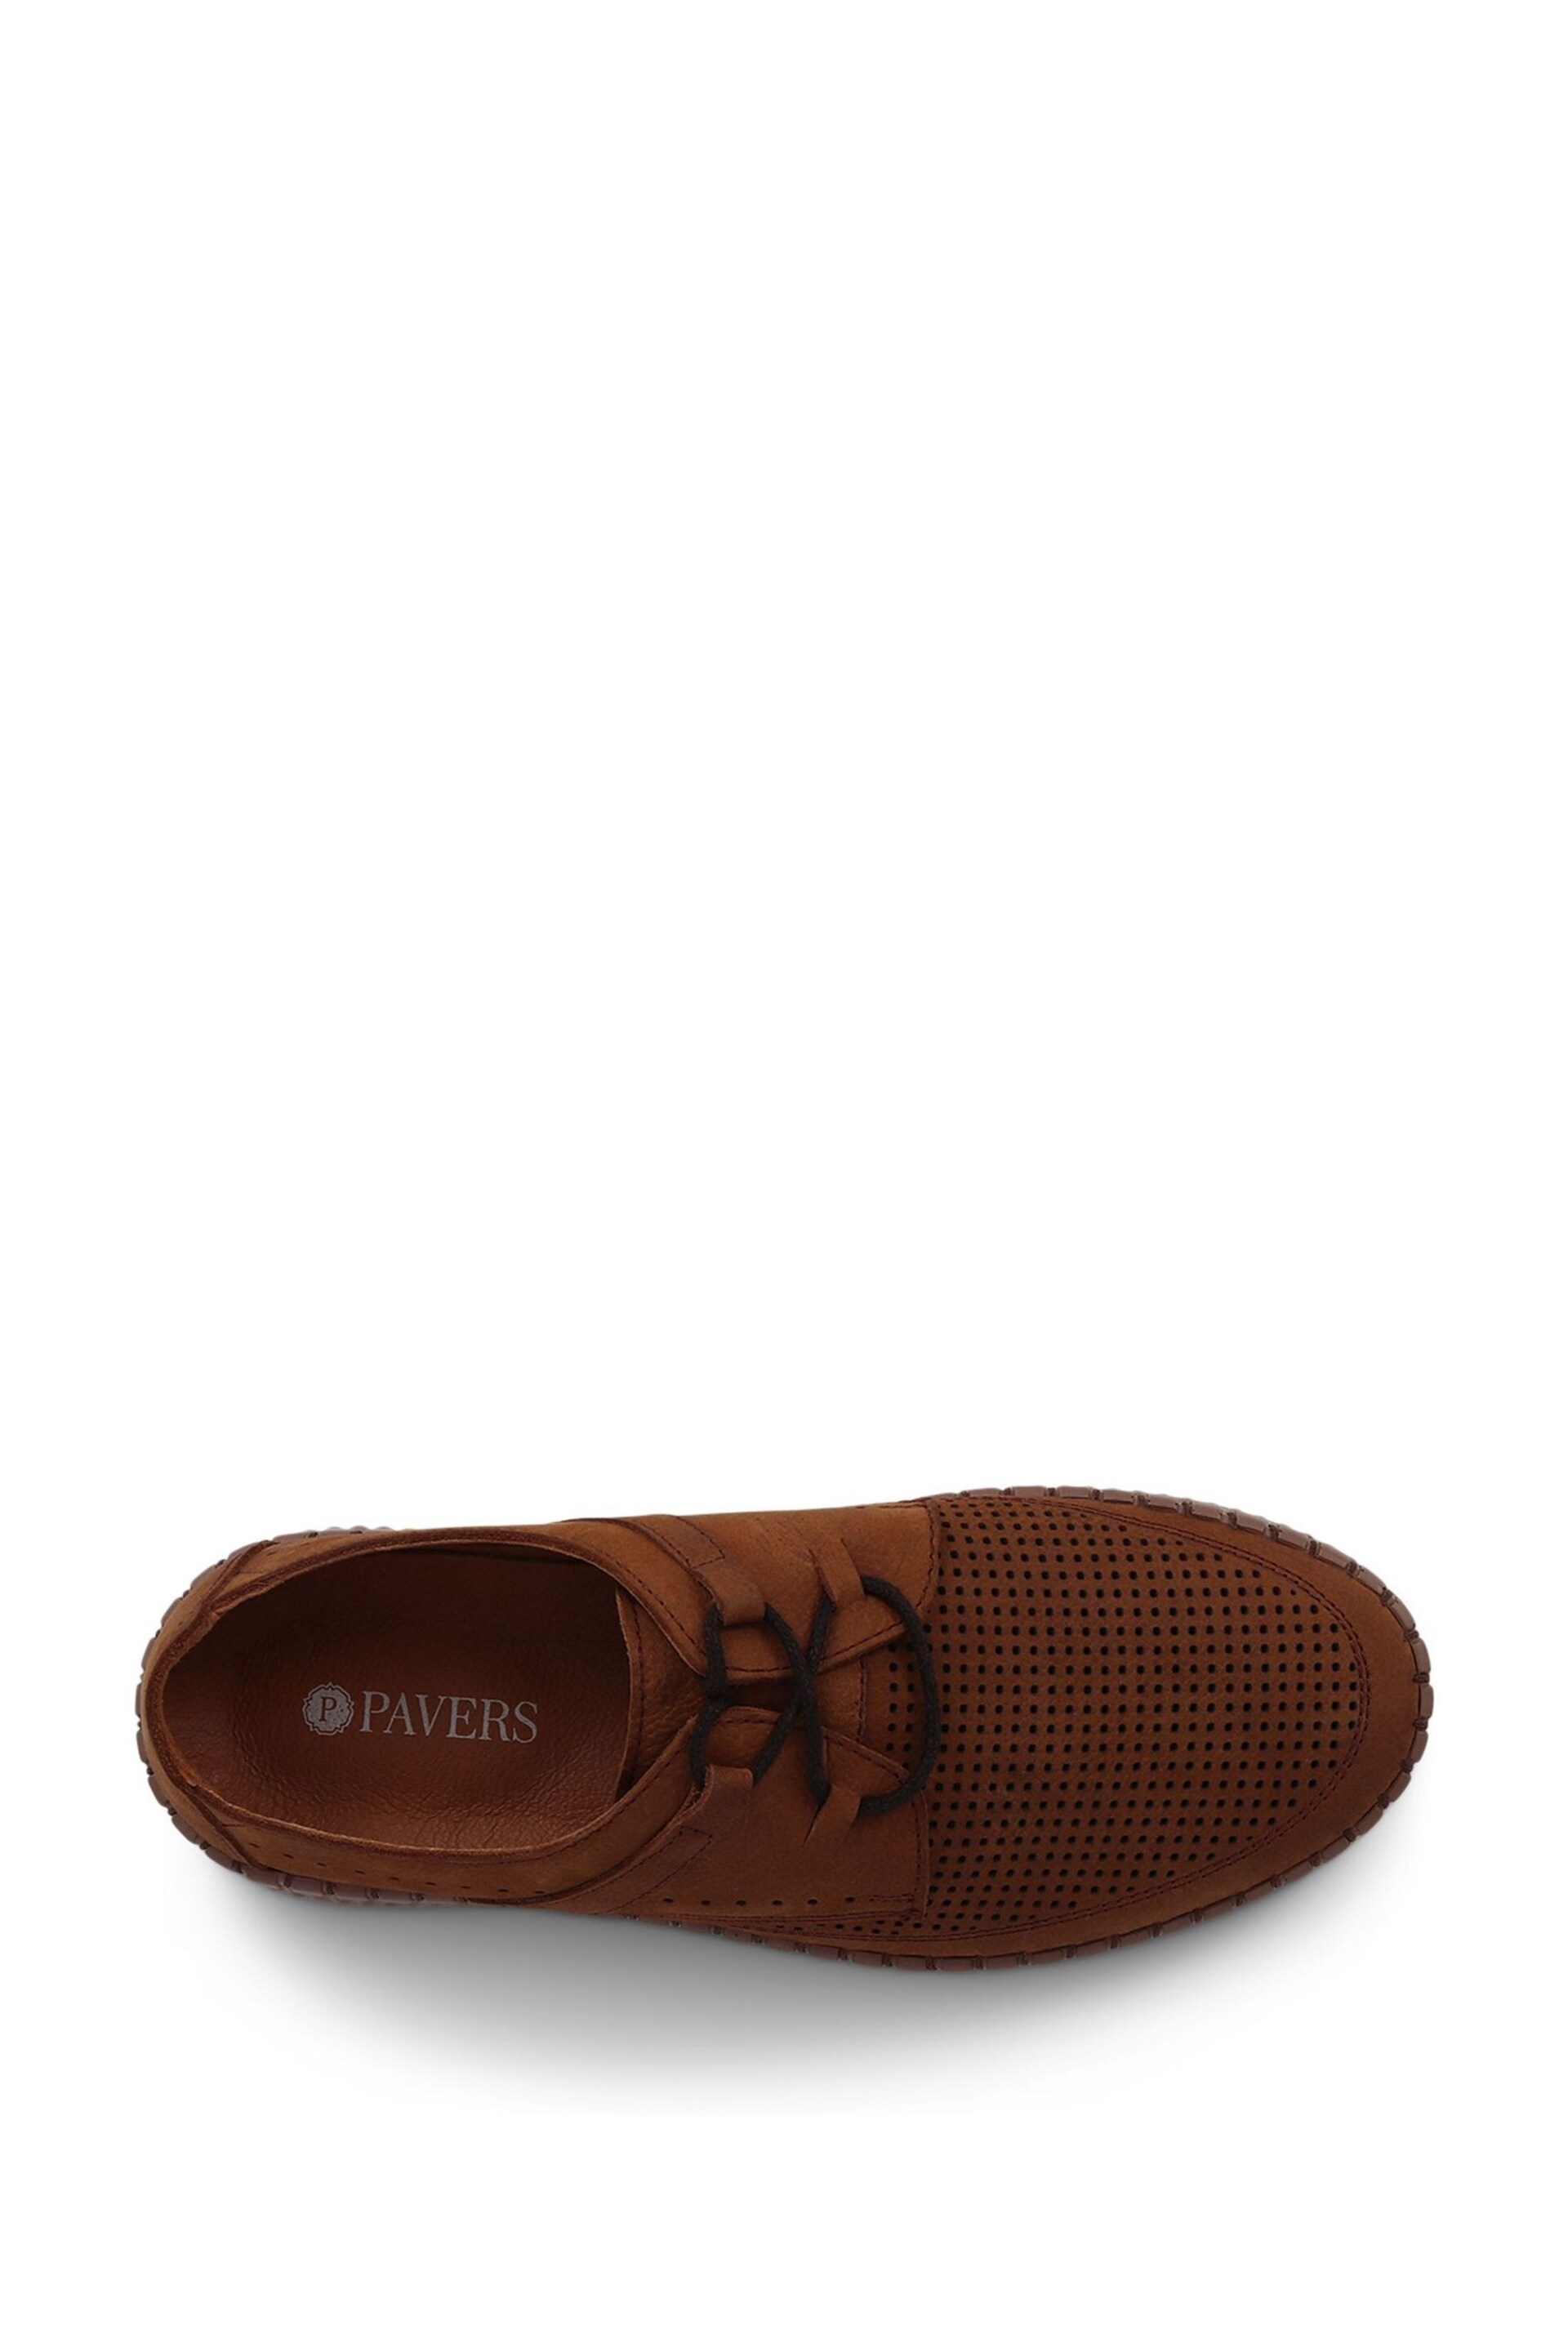 Pavers Lace-Up Leather Brown Shoes - Image 4 of 6